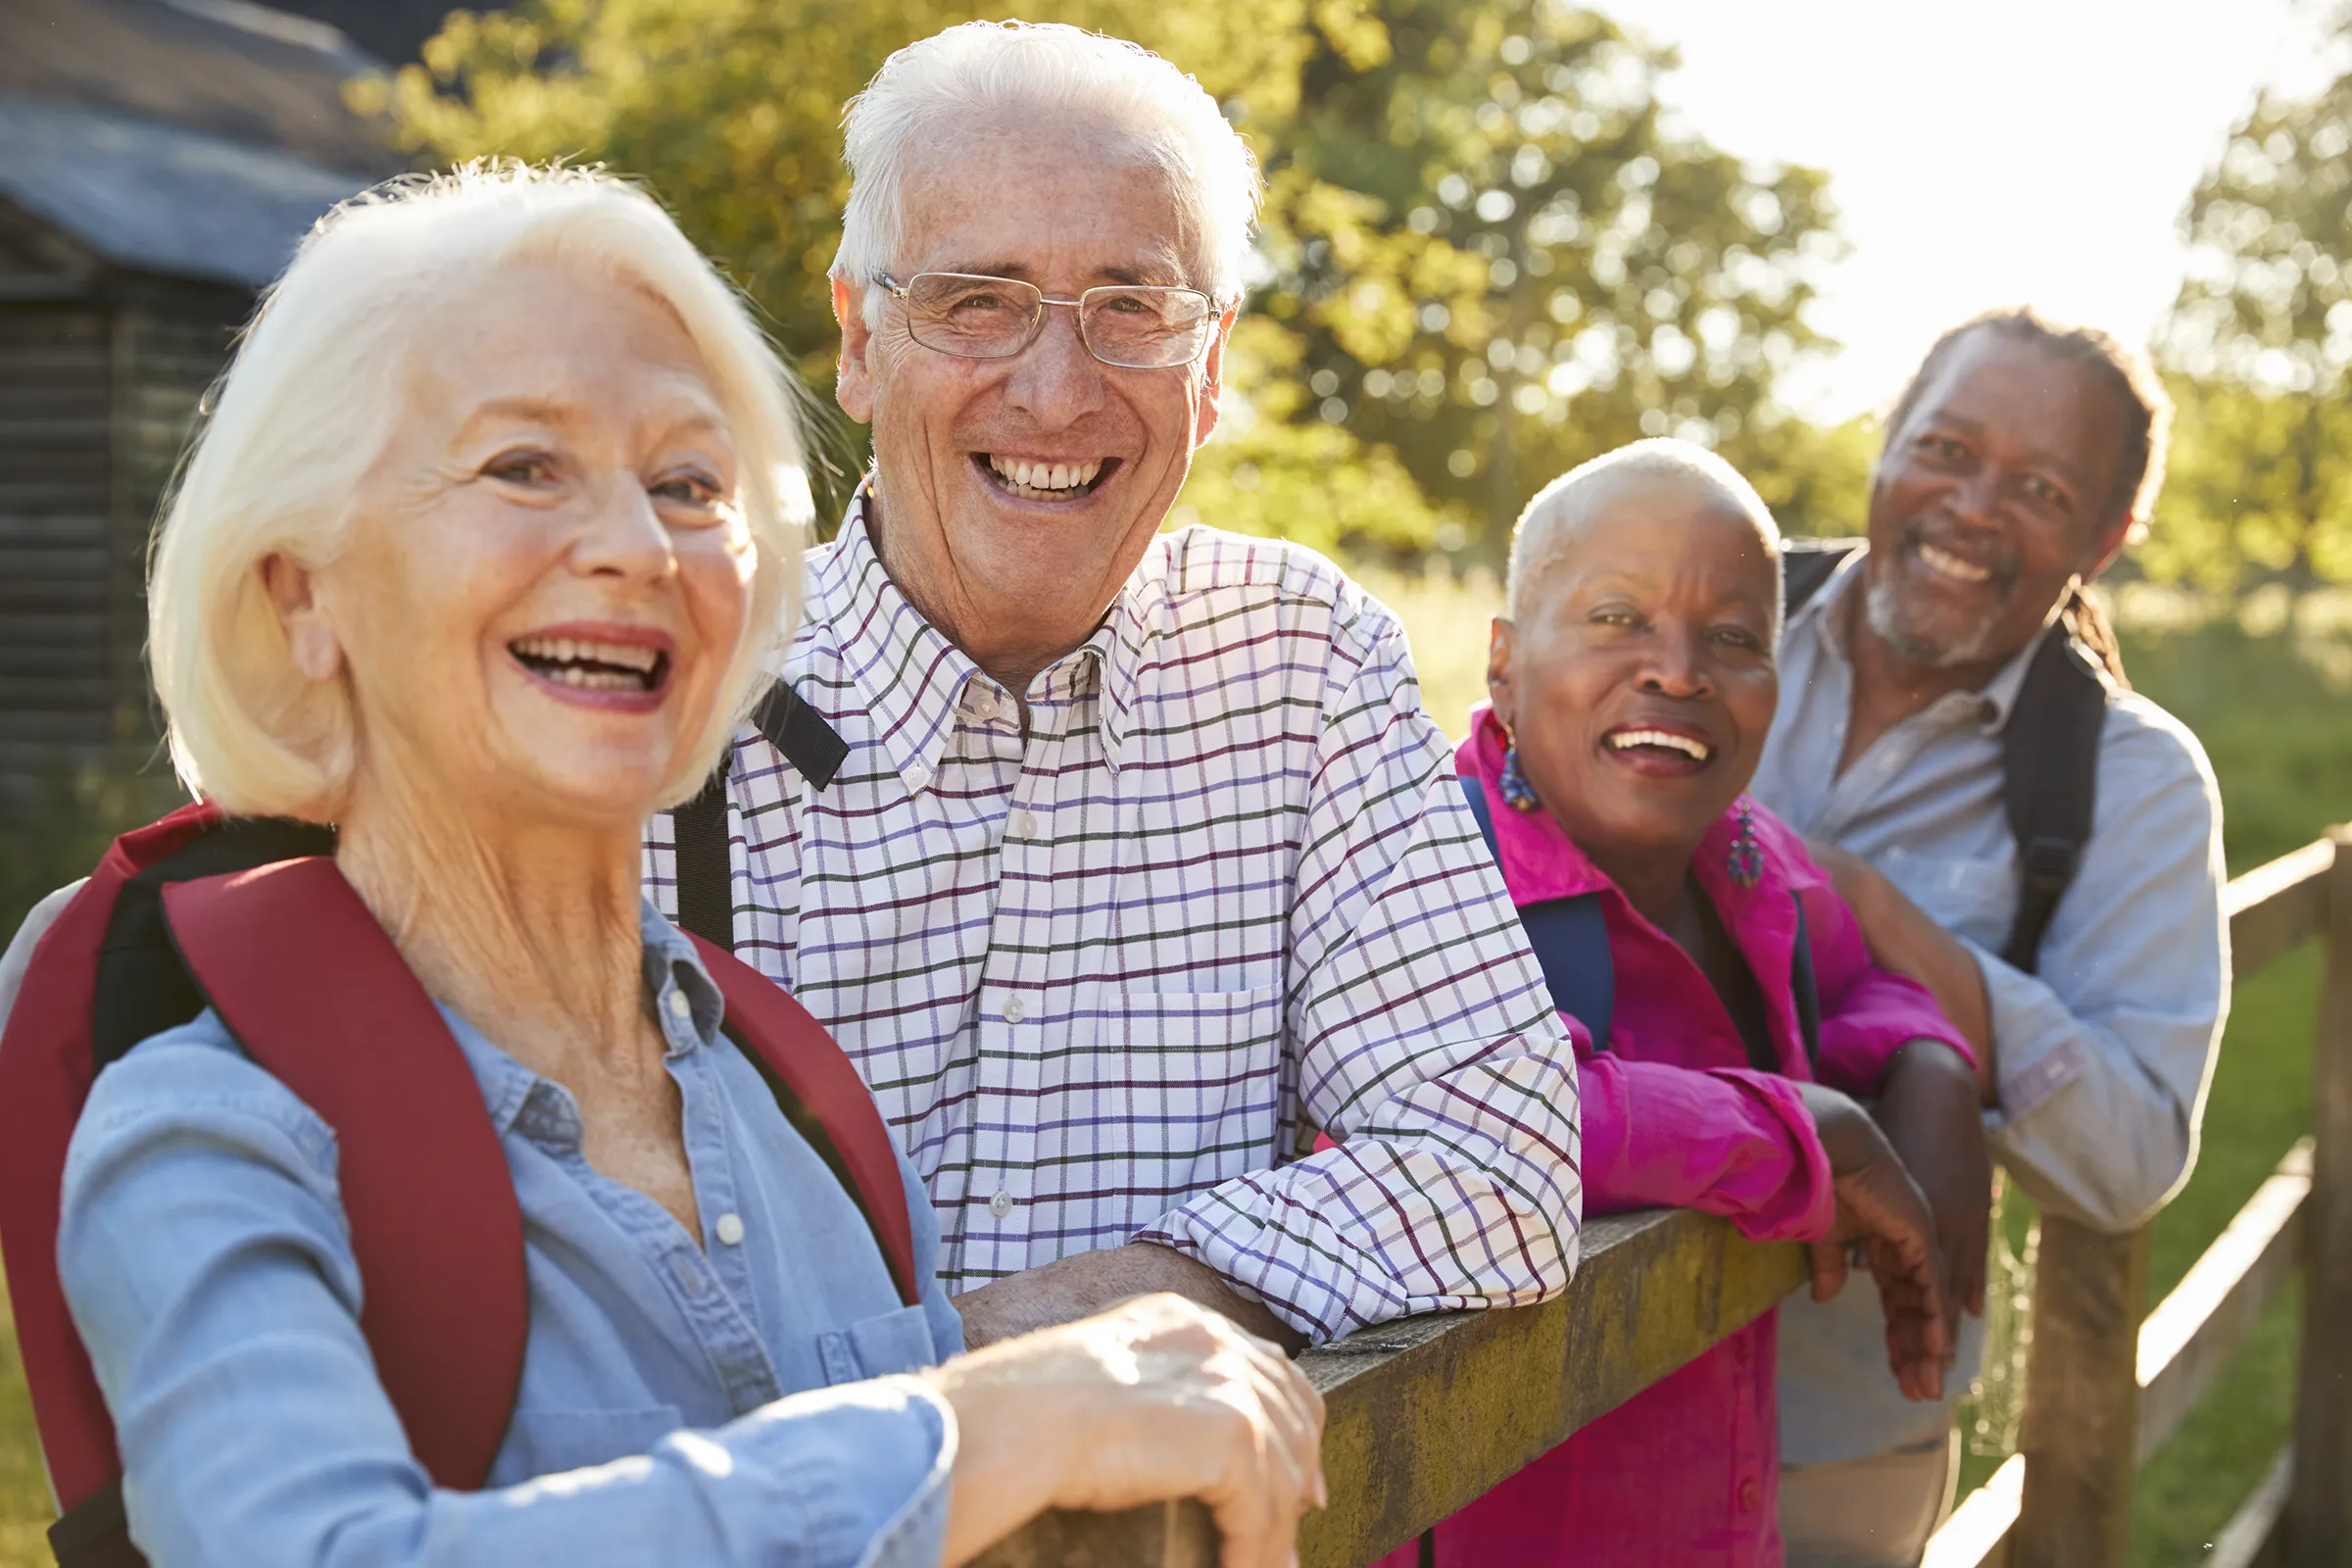 group of senior citizens leaning on fence outside smiling